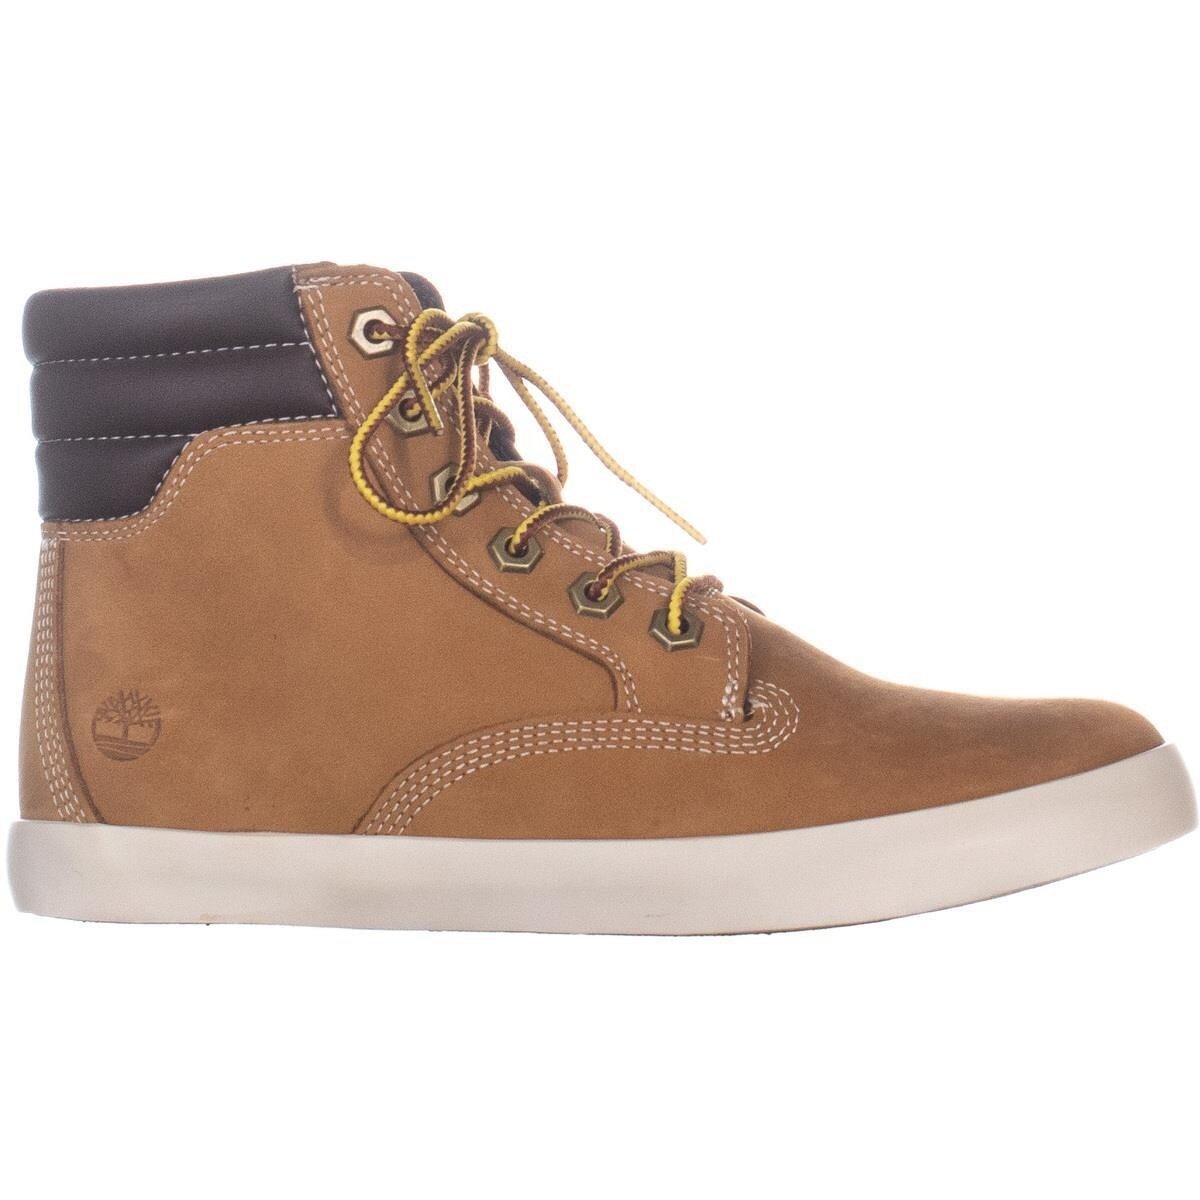 timberland women's dausette lace up sneaker boot